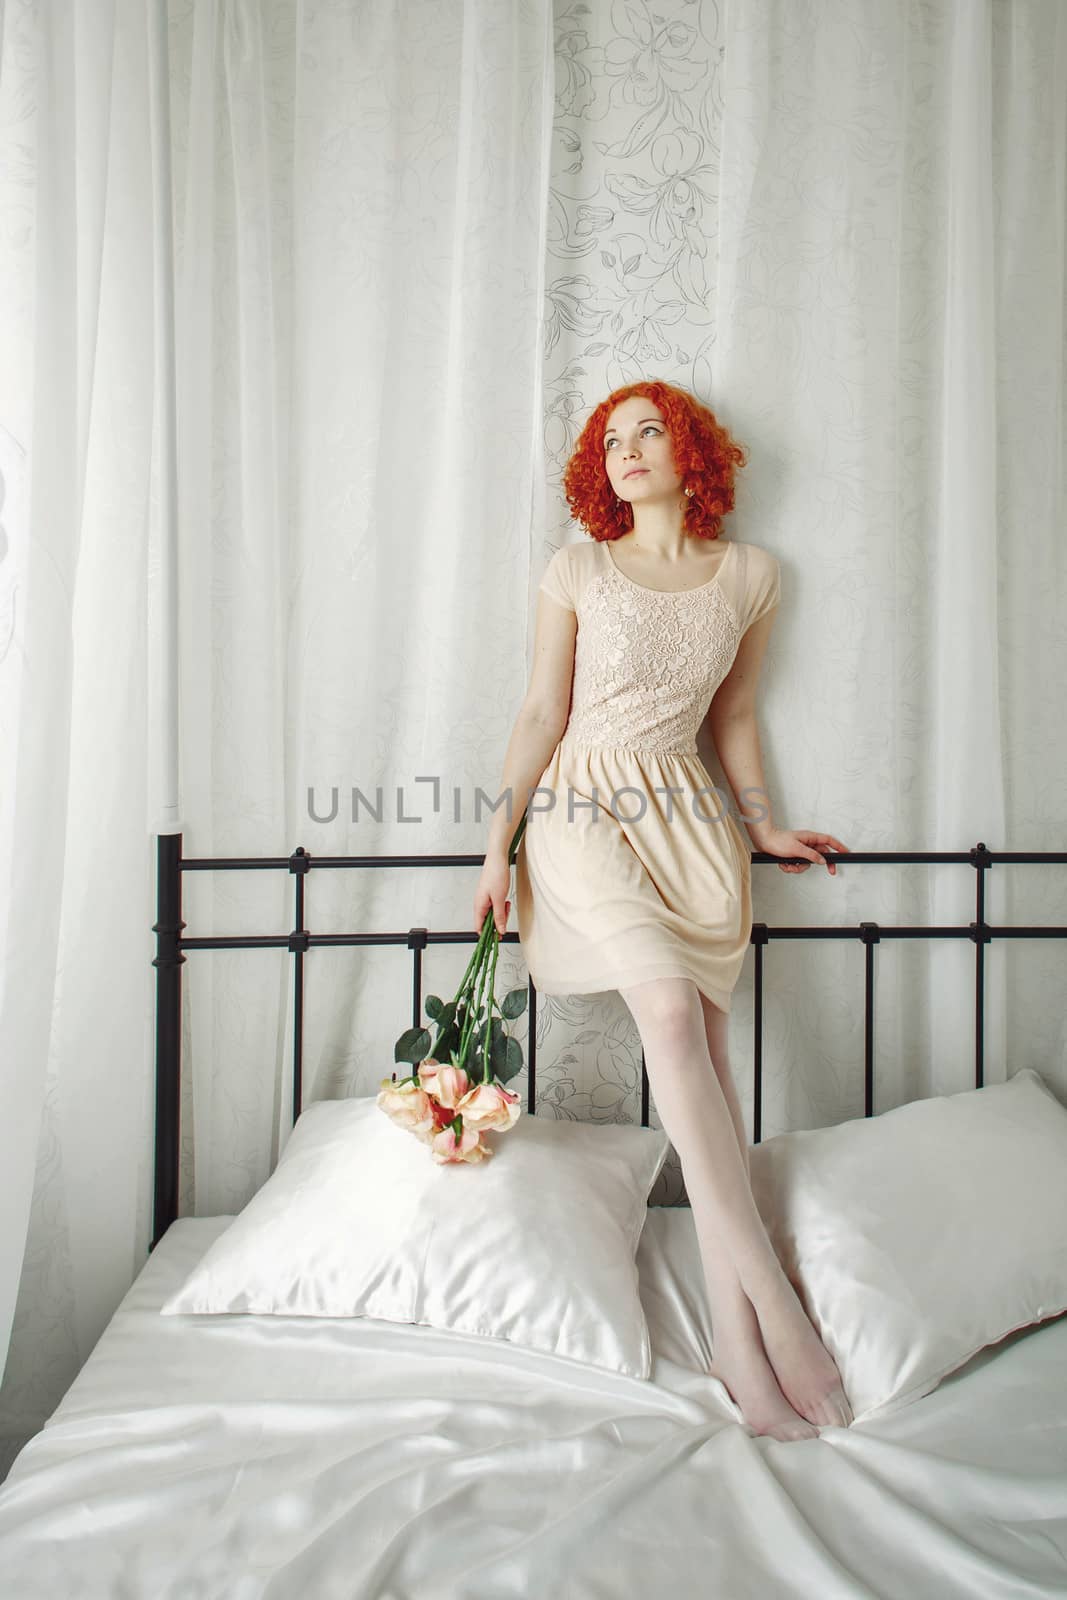 Attractive red-haired girl in a bedroom on the bed holding flowers